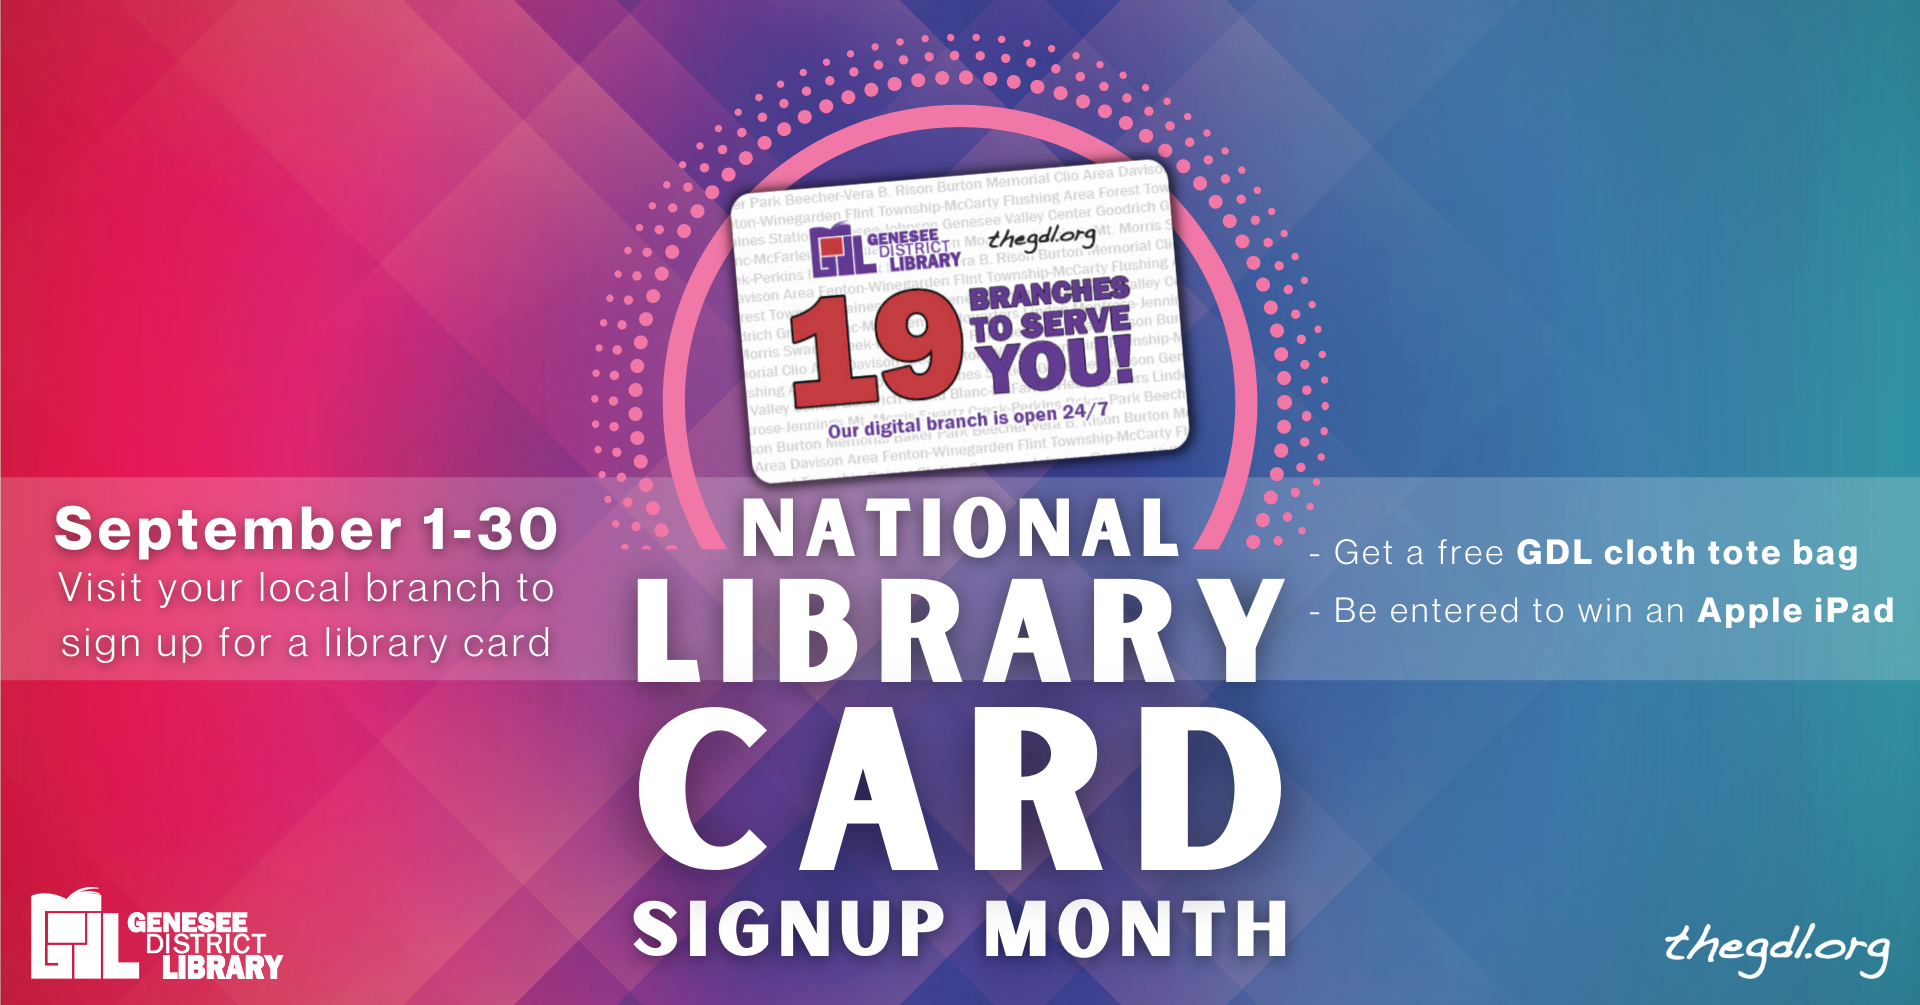 National Library Card Signup Month Genesee District Library